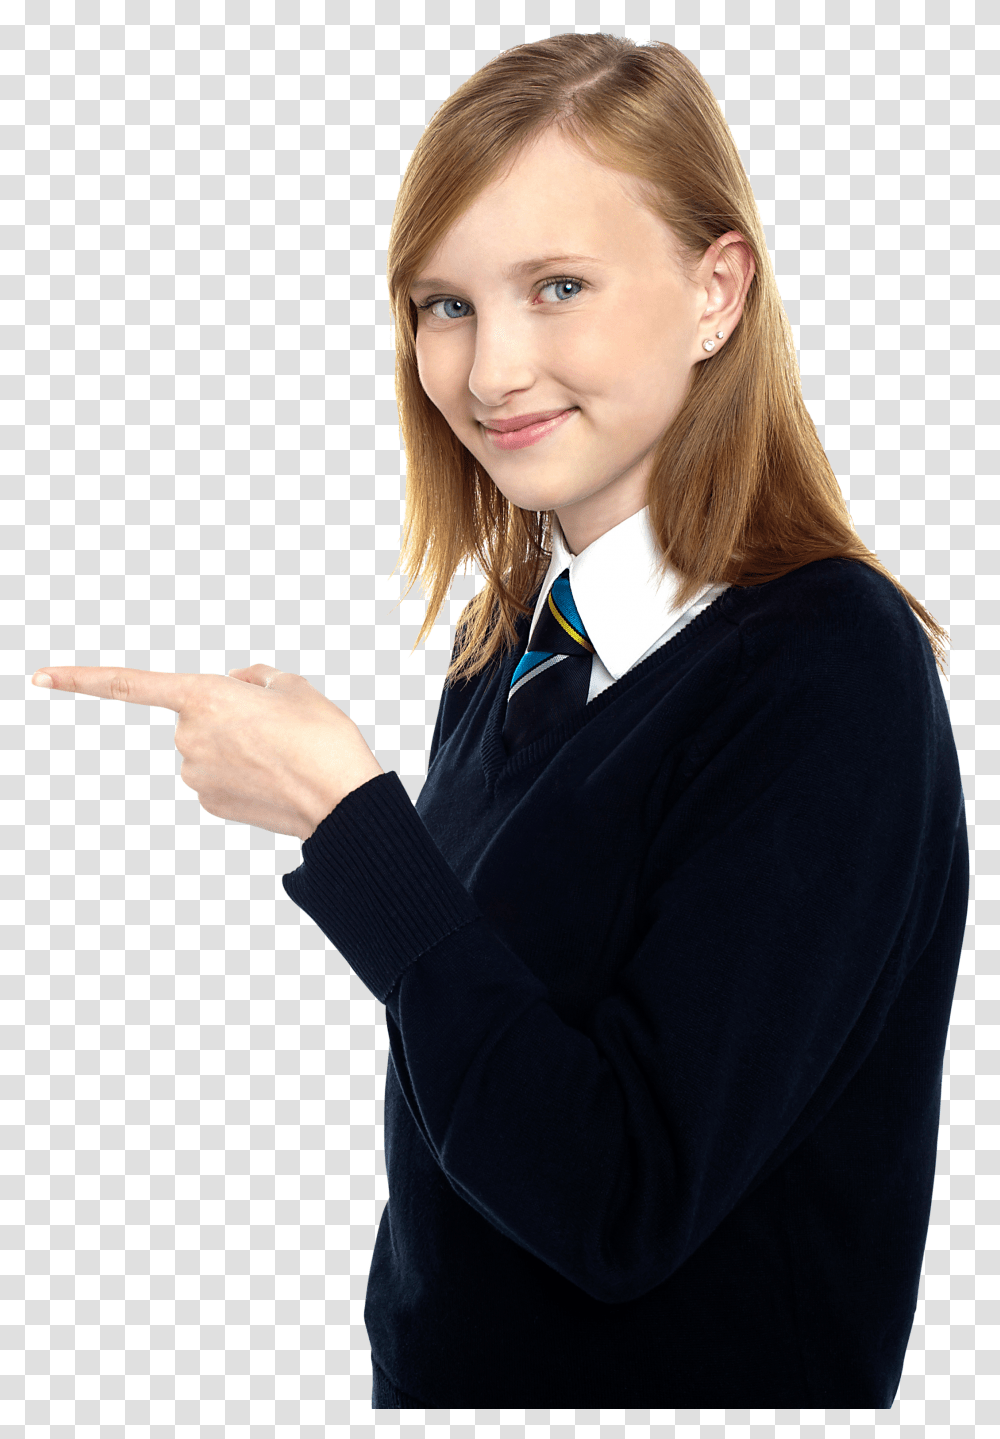 Women Pointing Left School Girl Pointing Transparent Png